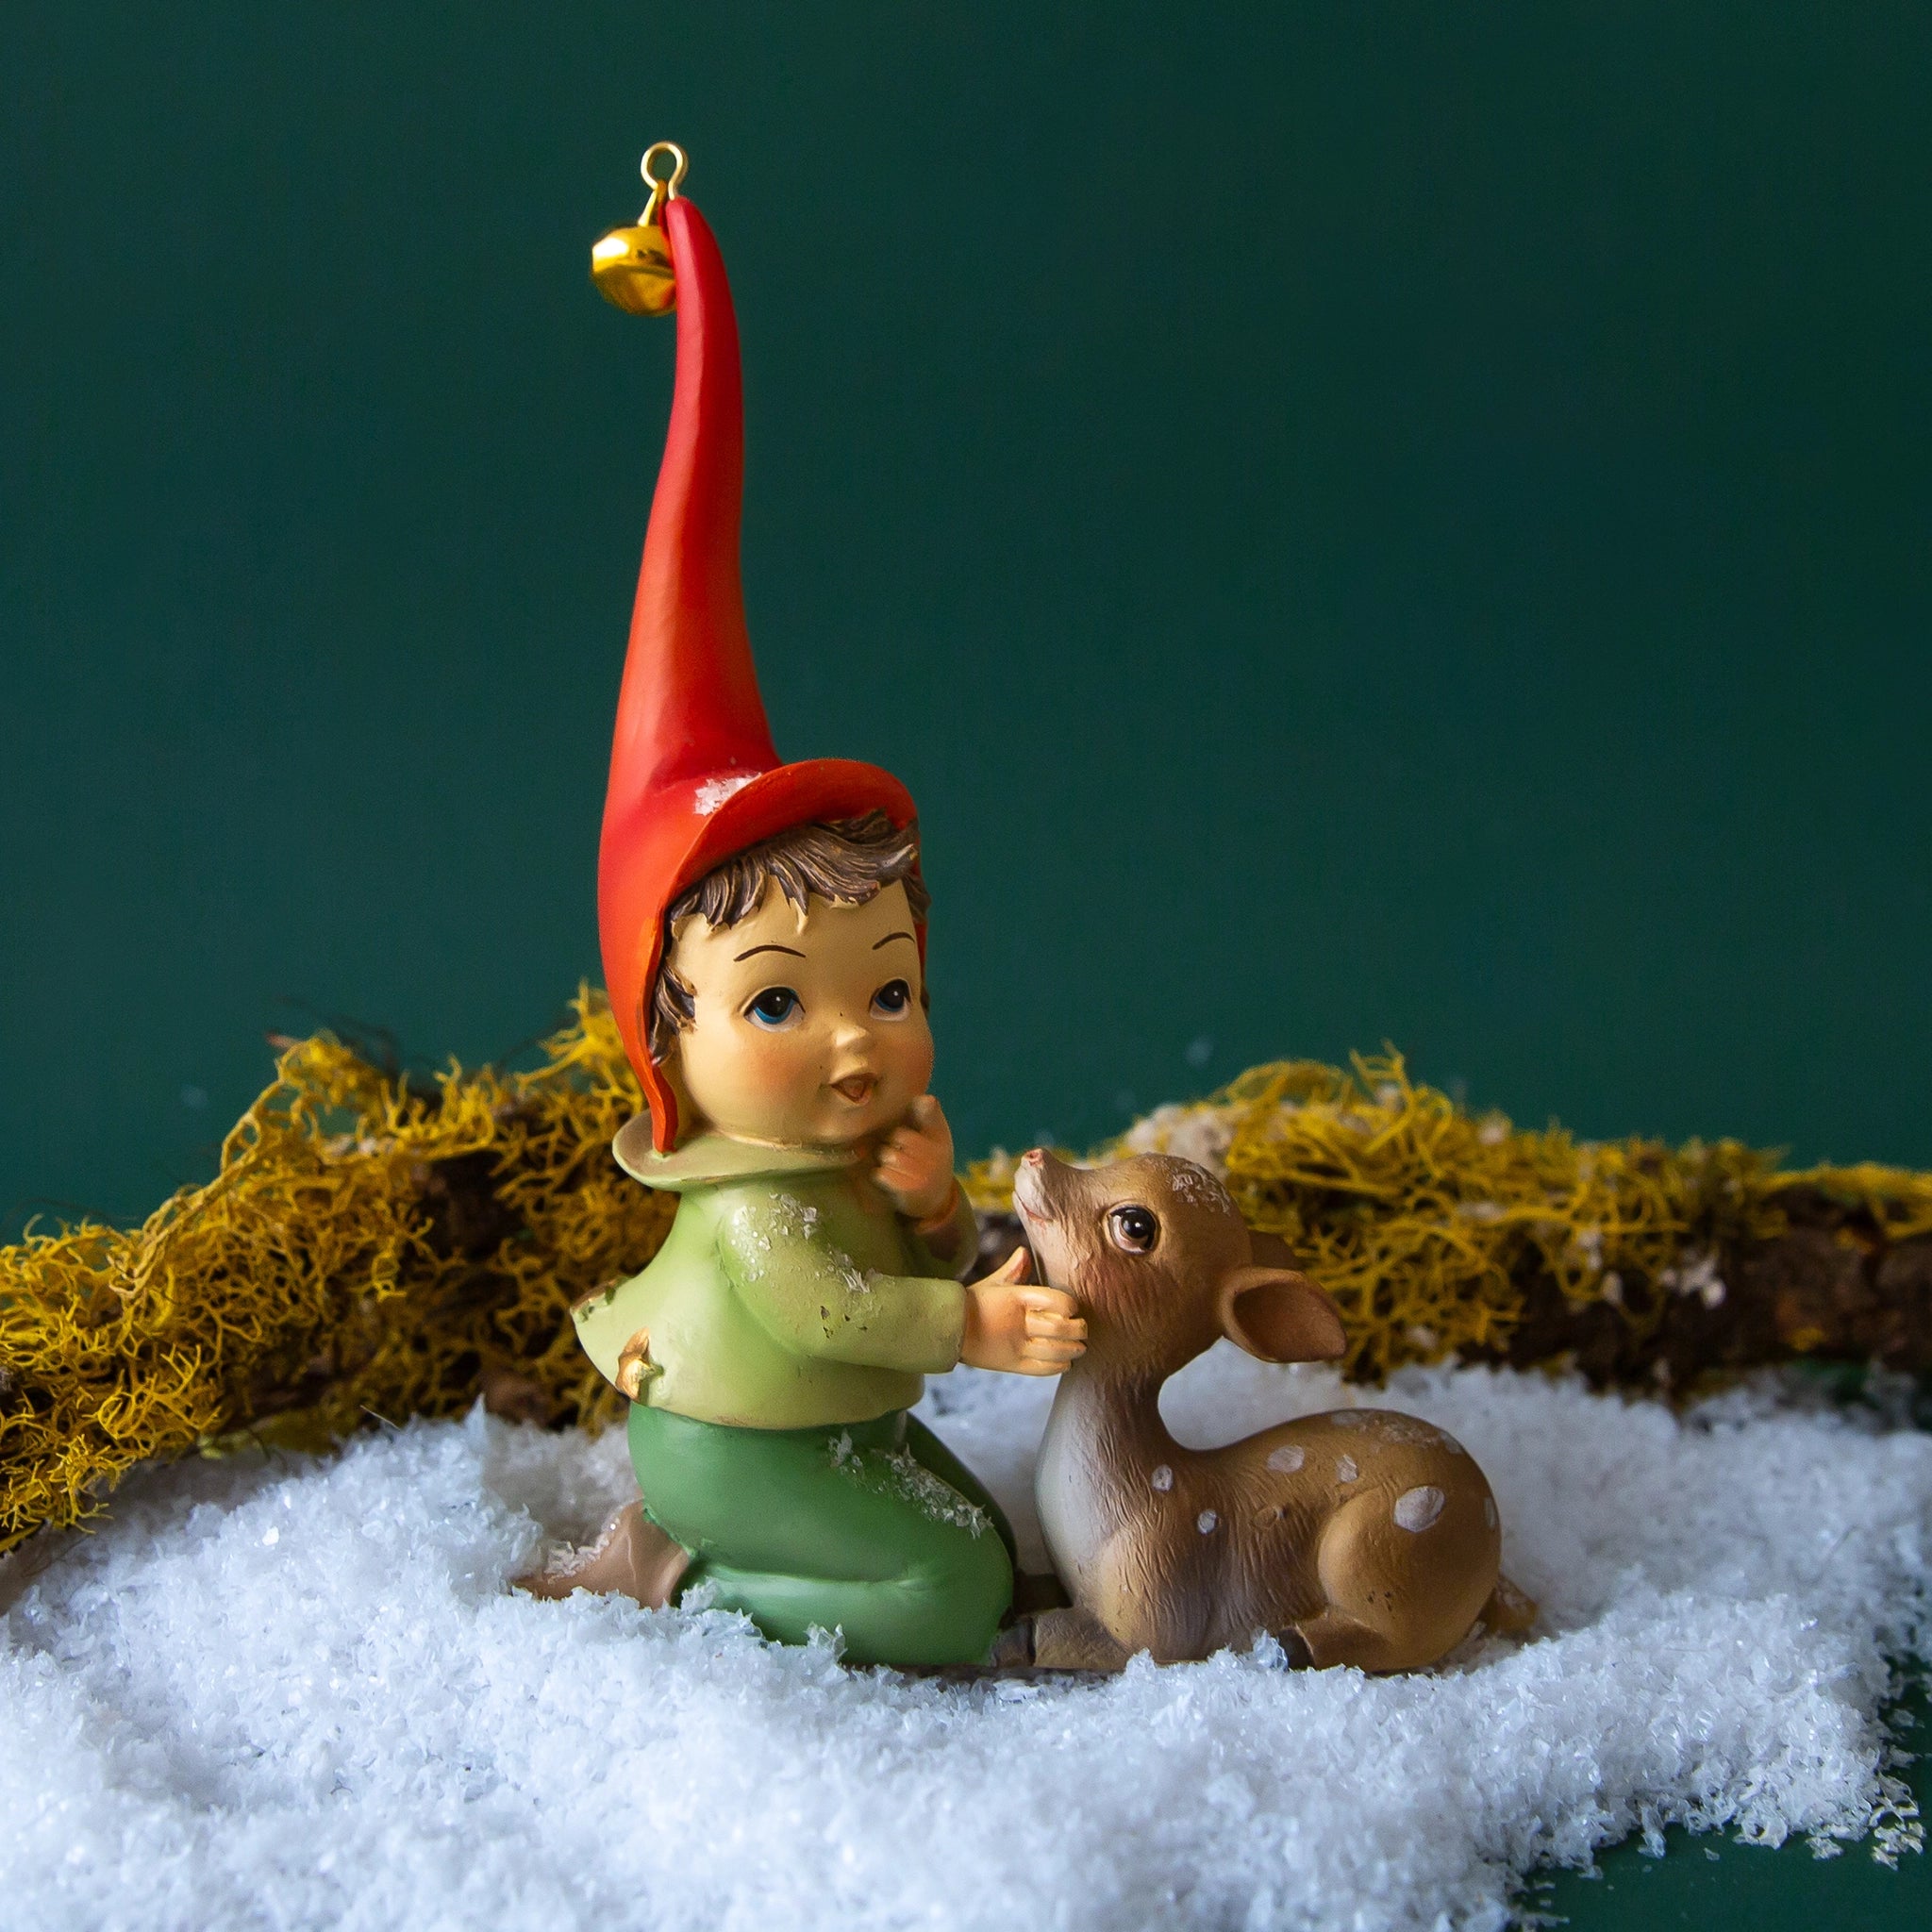 On a green background is an elf figurine with a long red hat and a brown fawn laying next to the elf.